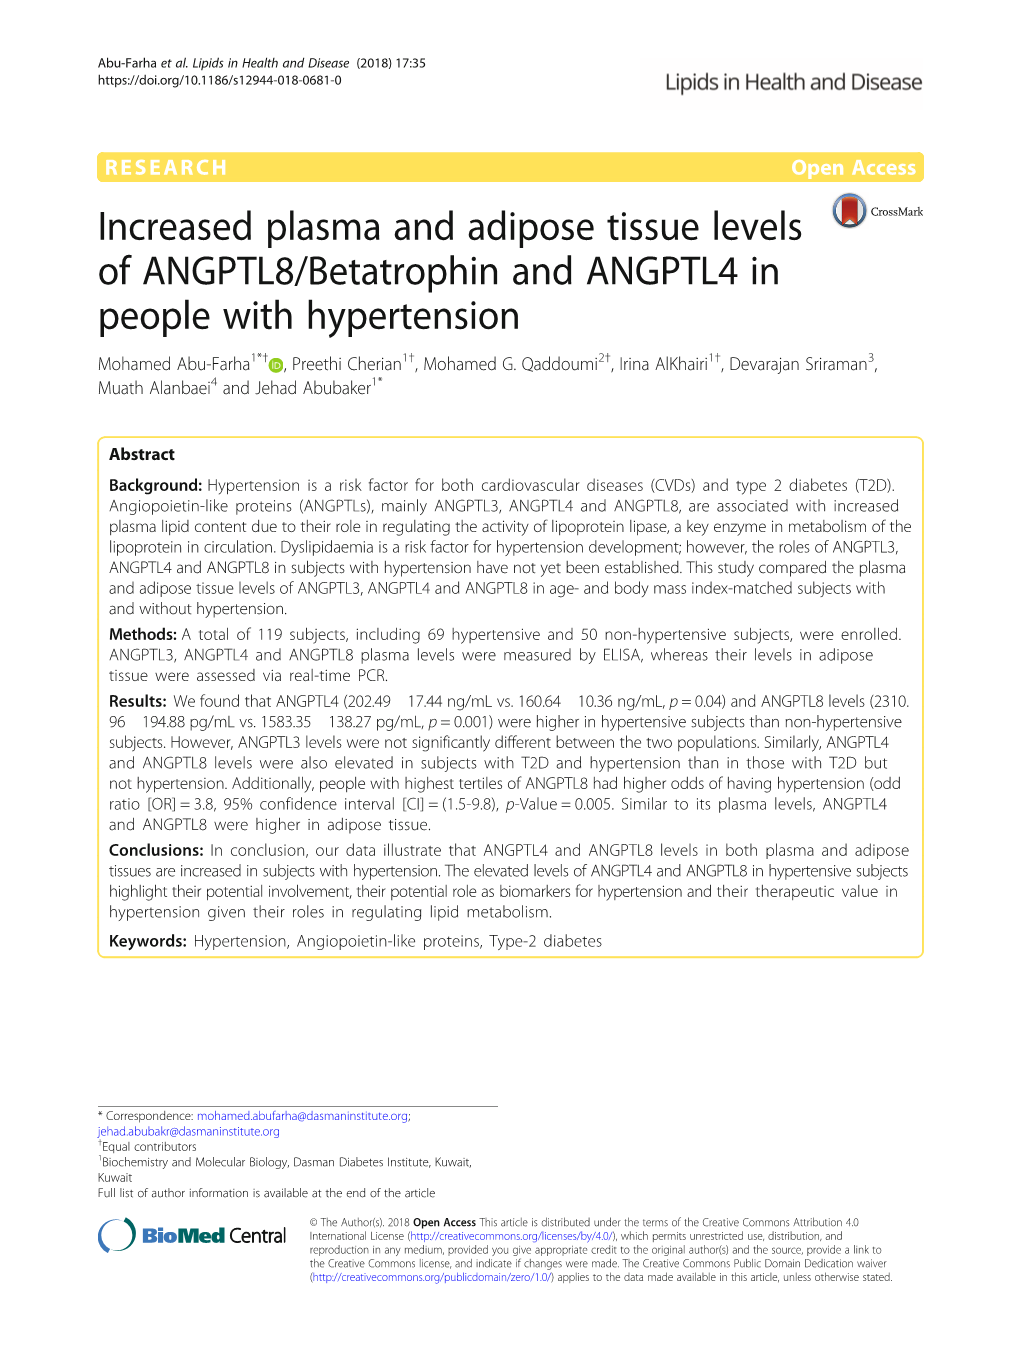 Increased Plasma and Adipose Tissue Levels of ANGPTL8/Betatrophin and ANGPTL4 in People with Hypertension Mohamed Abu-Farha1*† , Preethi Cherian1†, Mohamed G